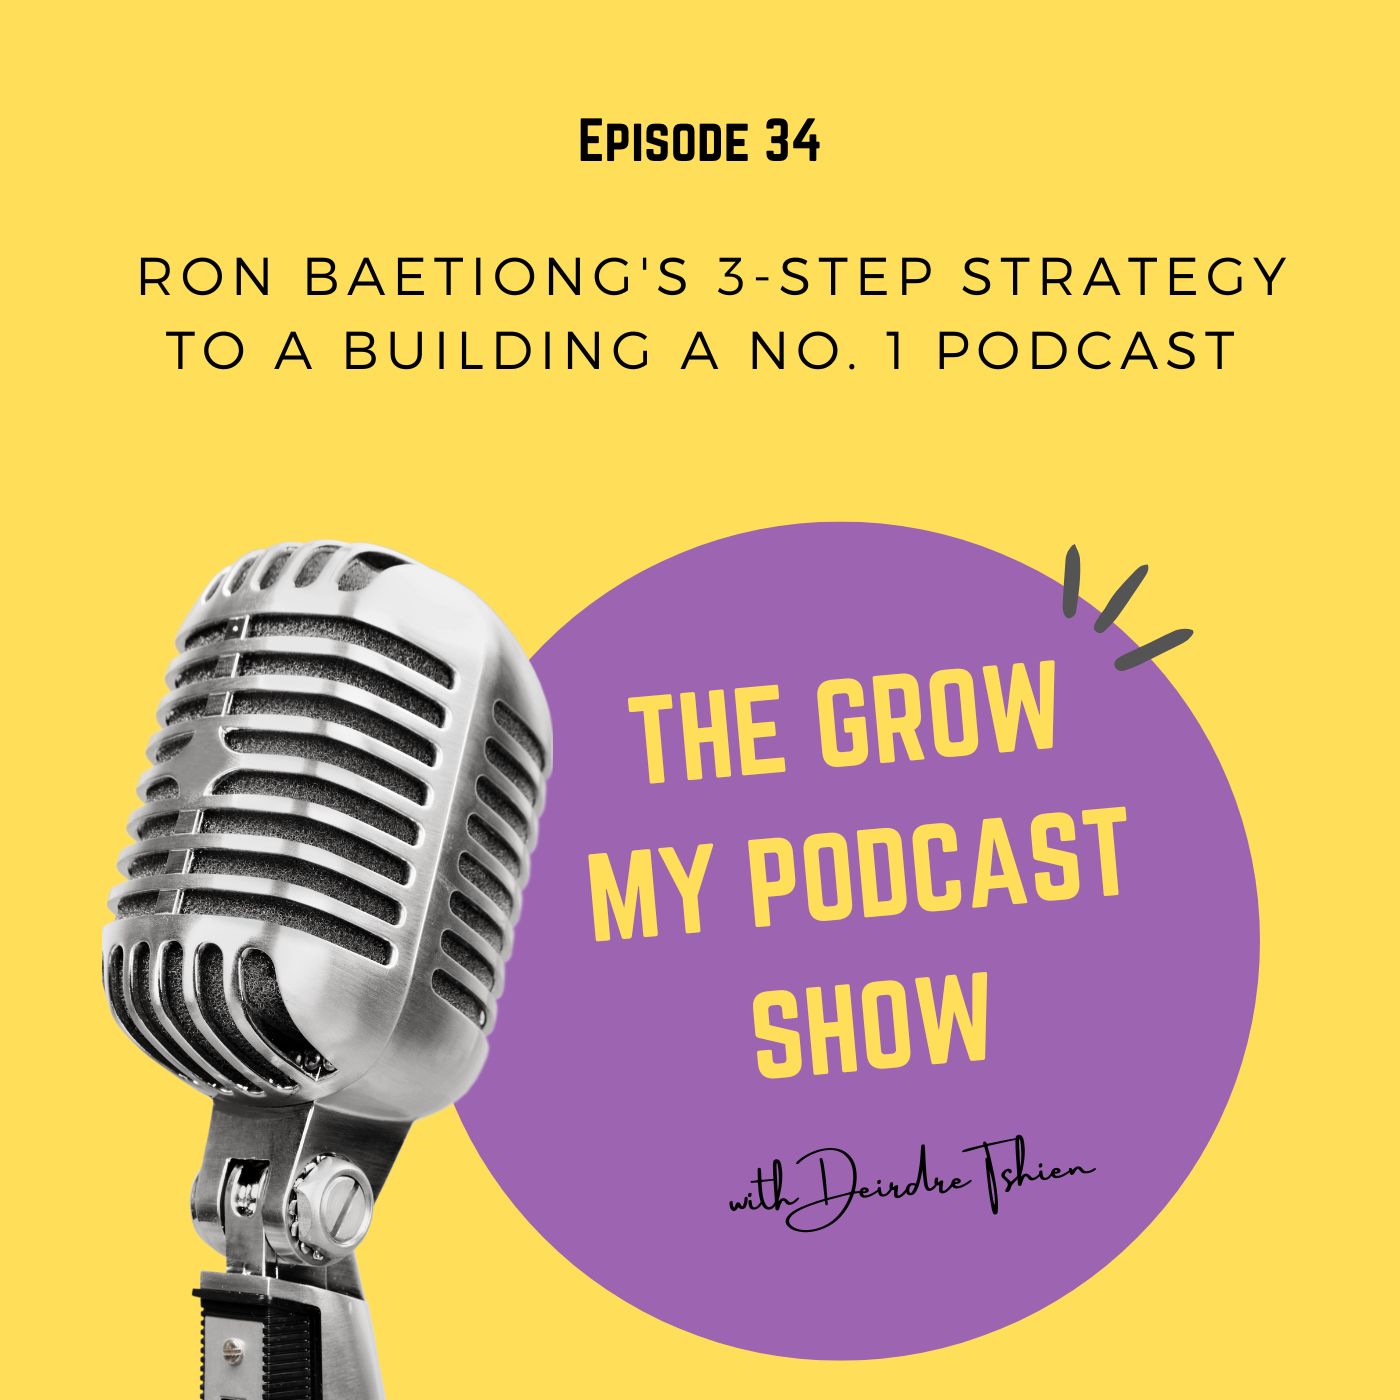 34. Ron Baetiong's 3-Step Strategy to a Building a No. 1 Podcast